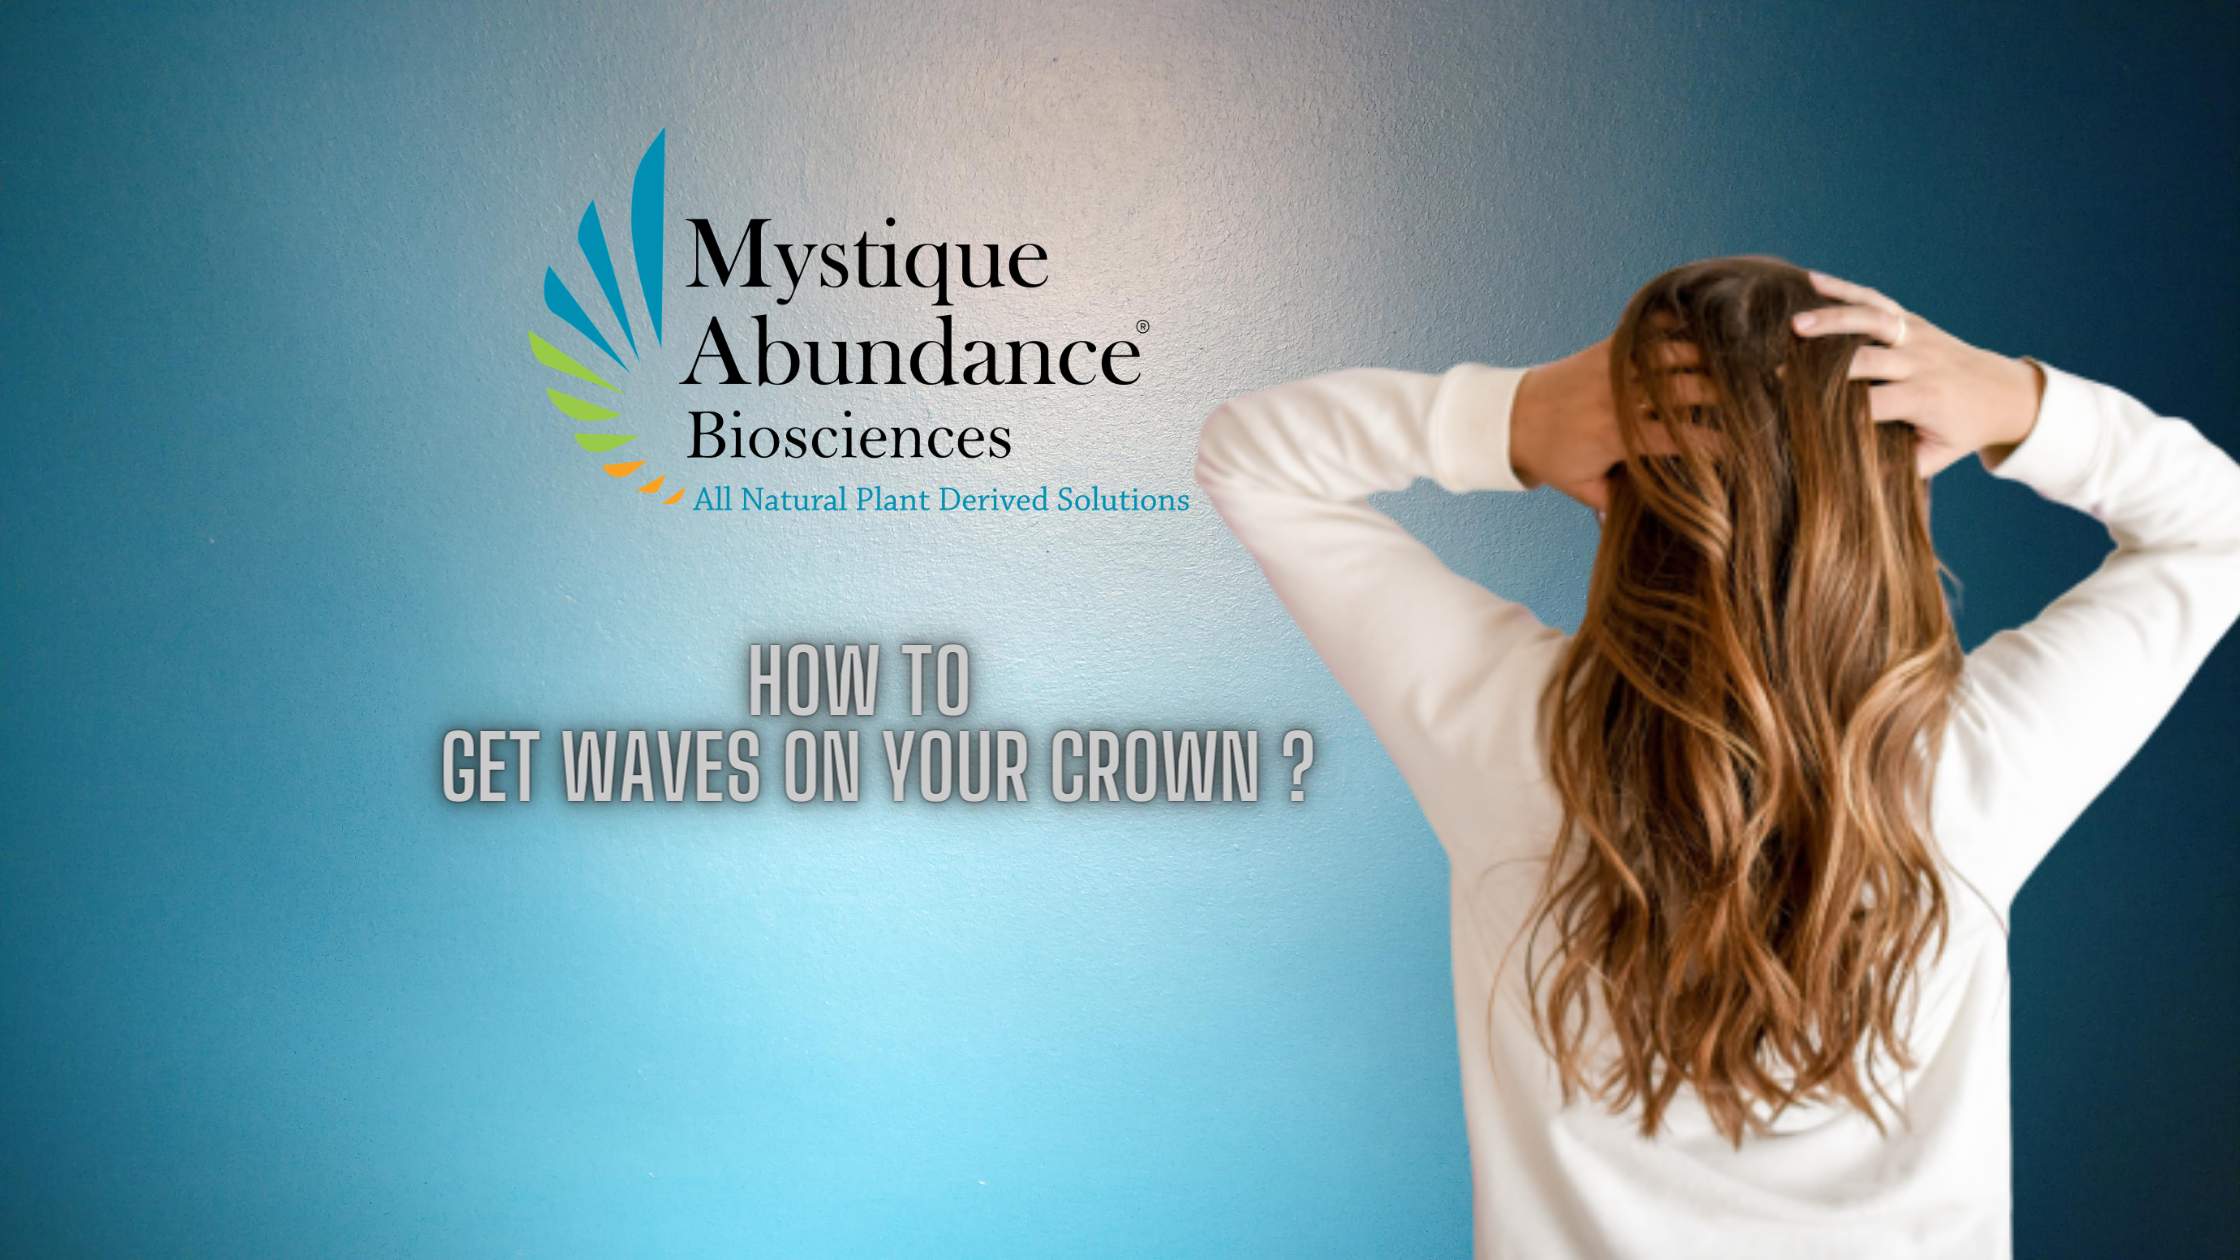 How to get Waves on your crown? – Mystique Abundance